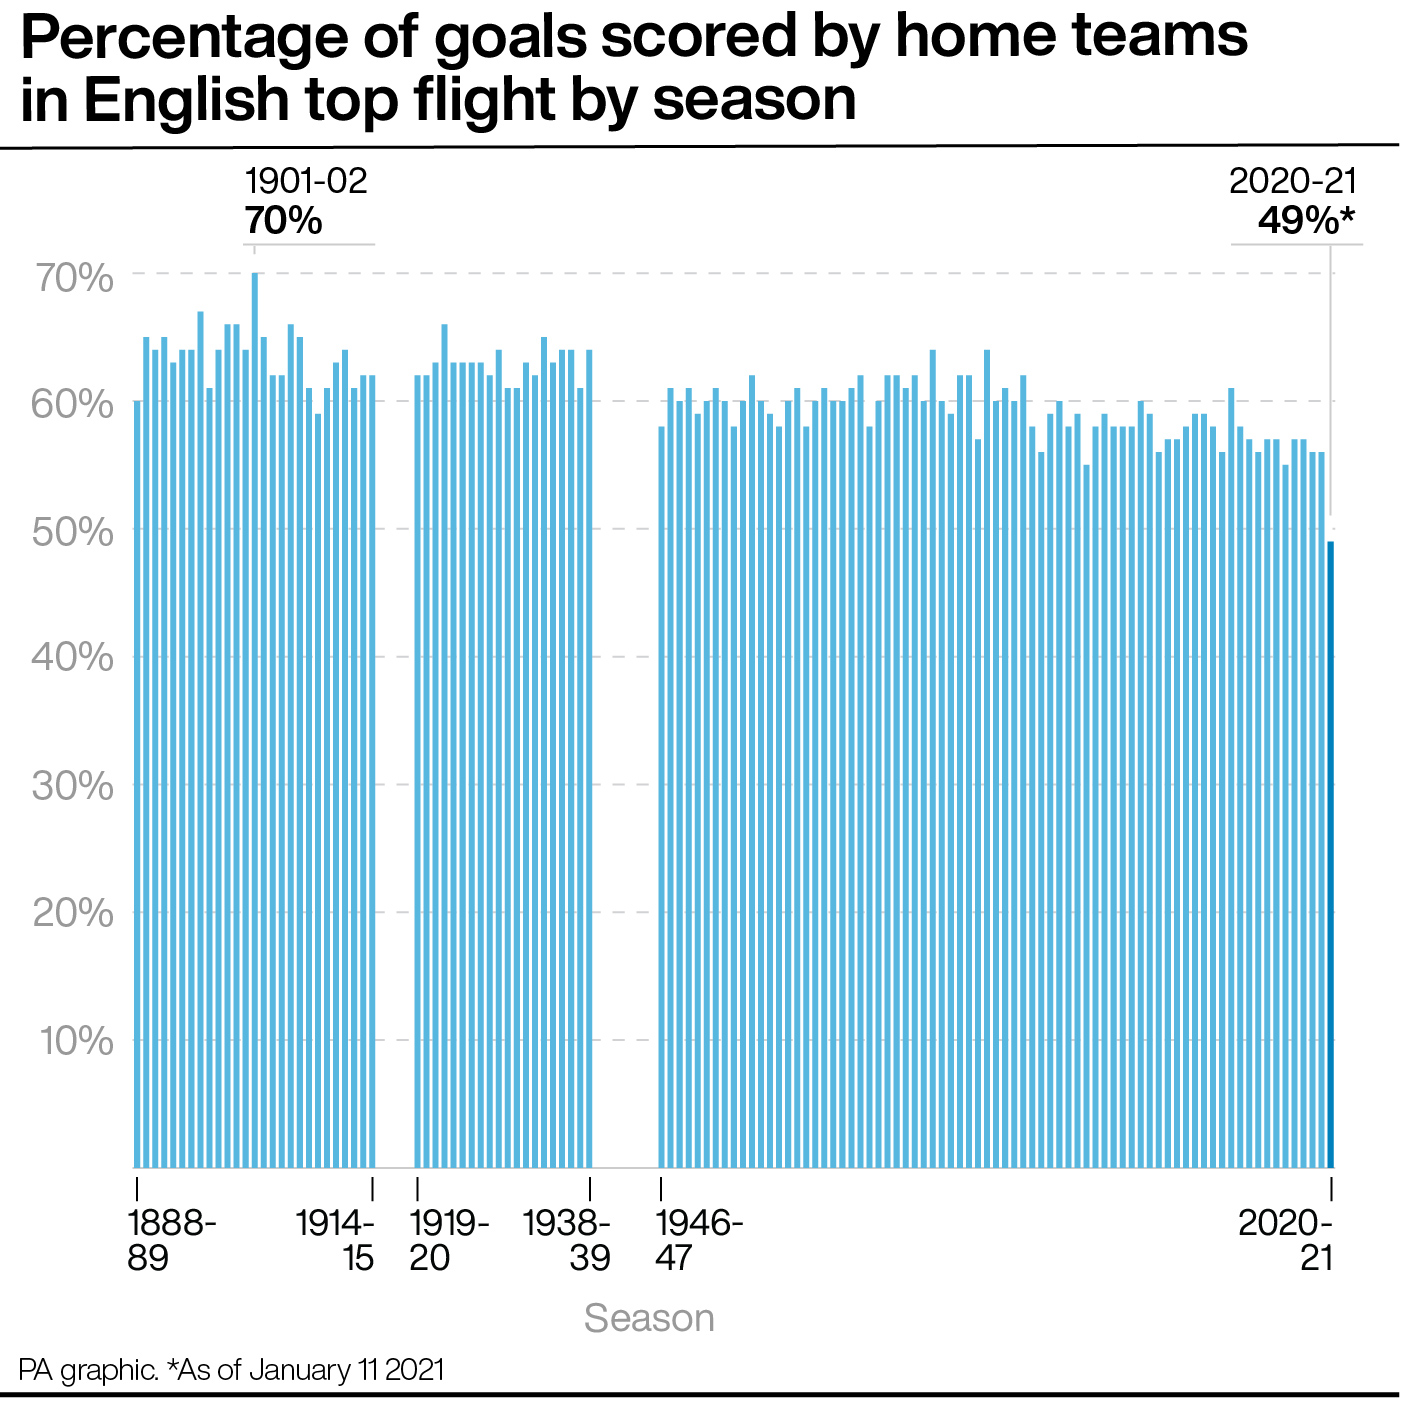 Precentage of goals scored by home teams in English top flight by season